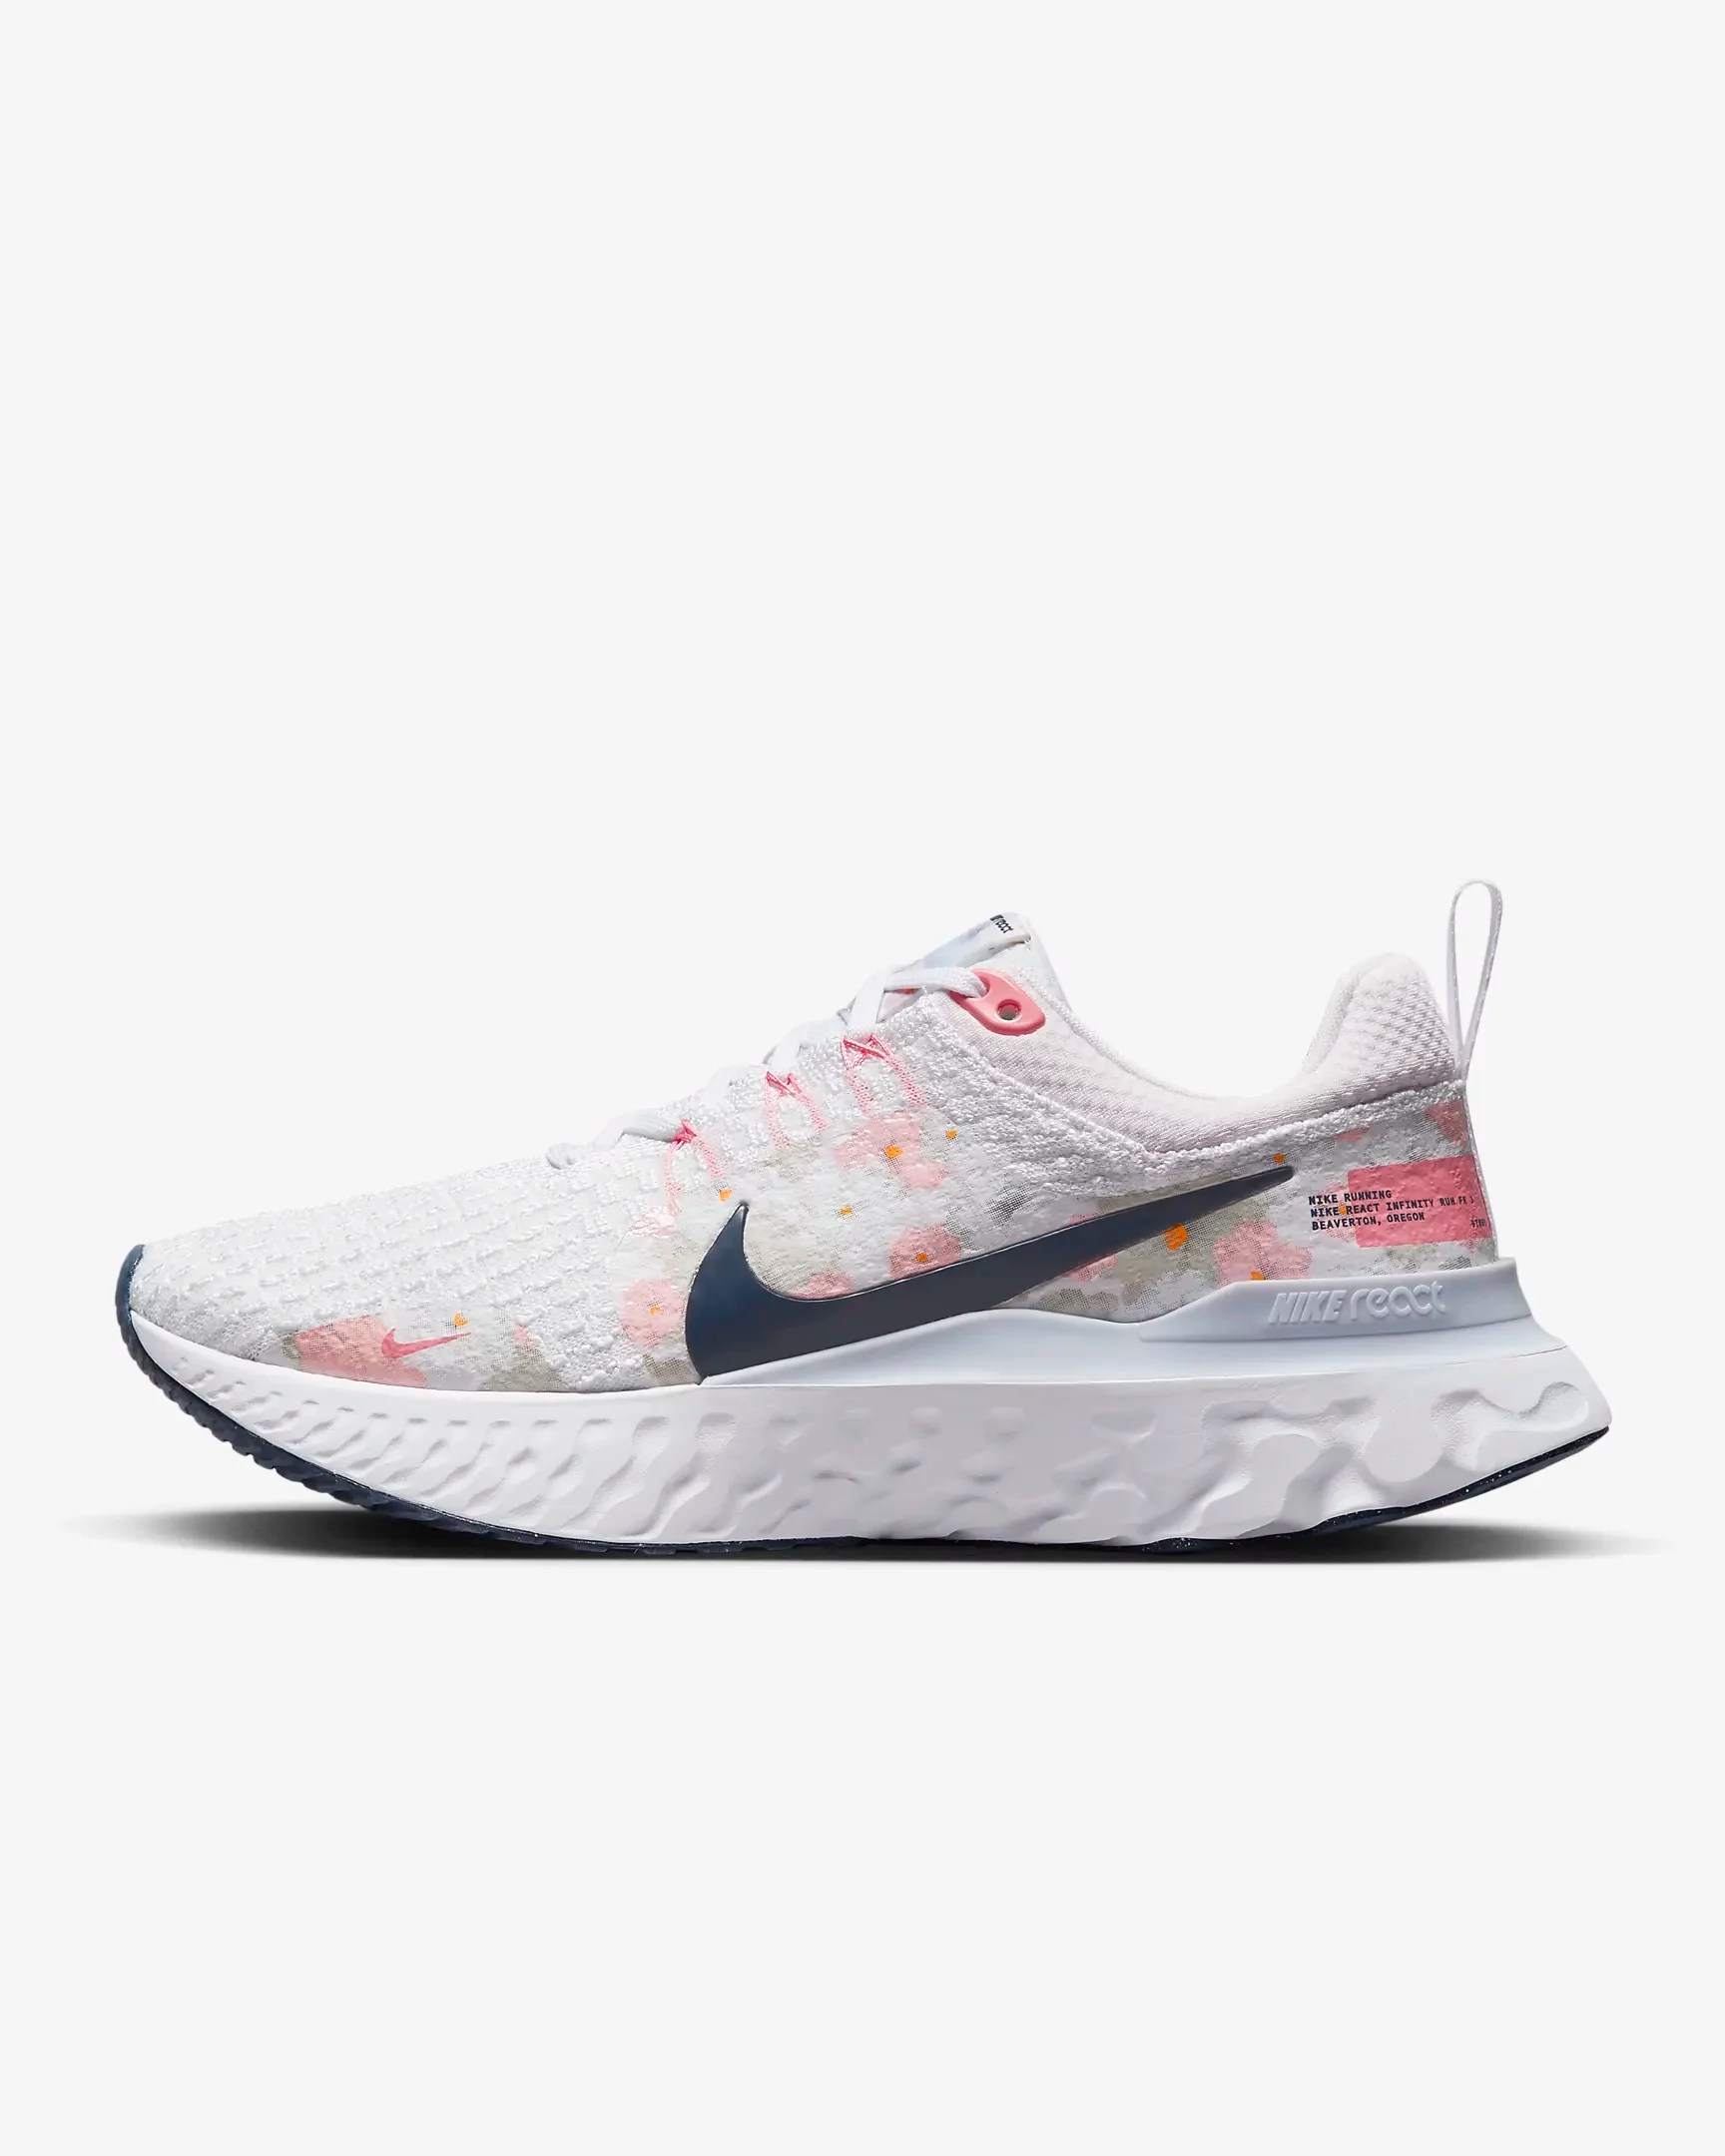 Nike React Infinity 3, best sneakers for ankle support